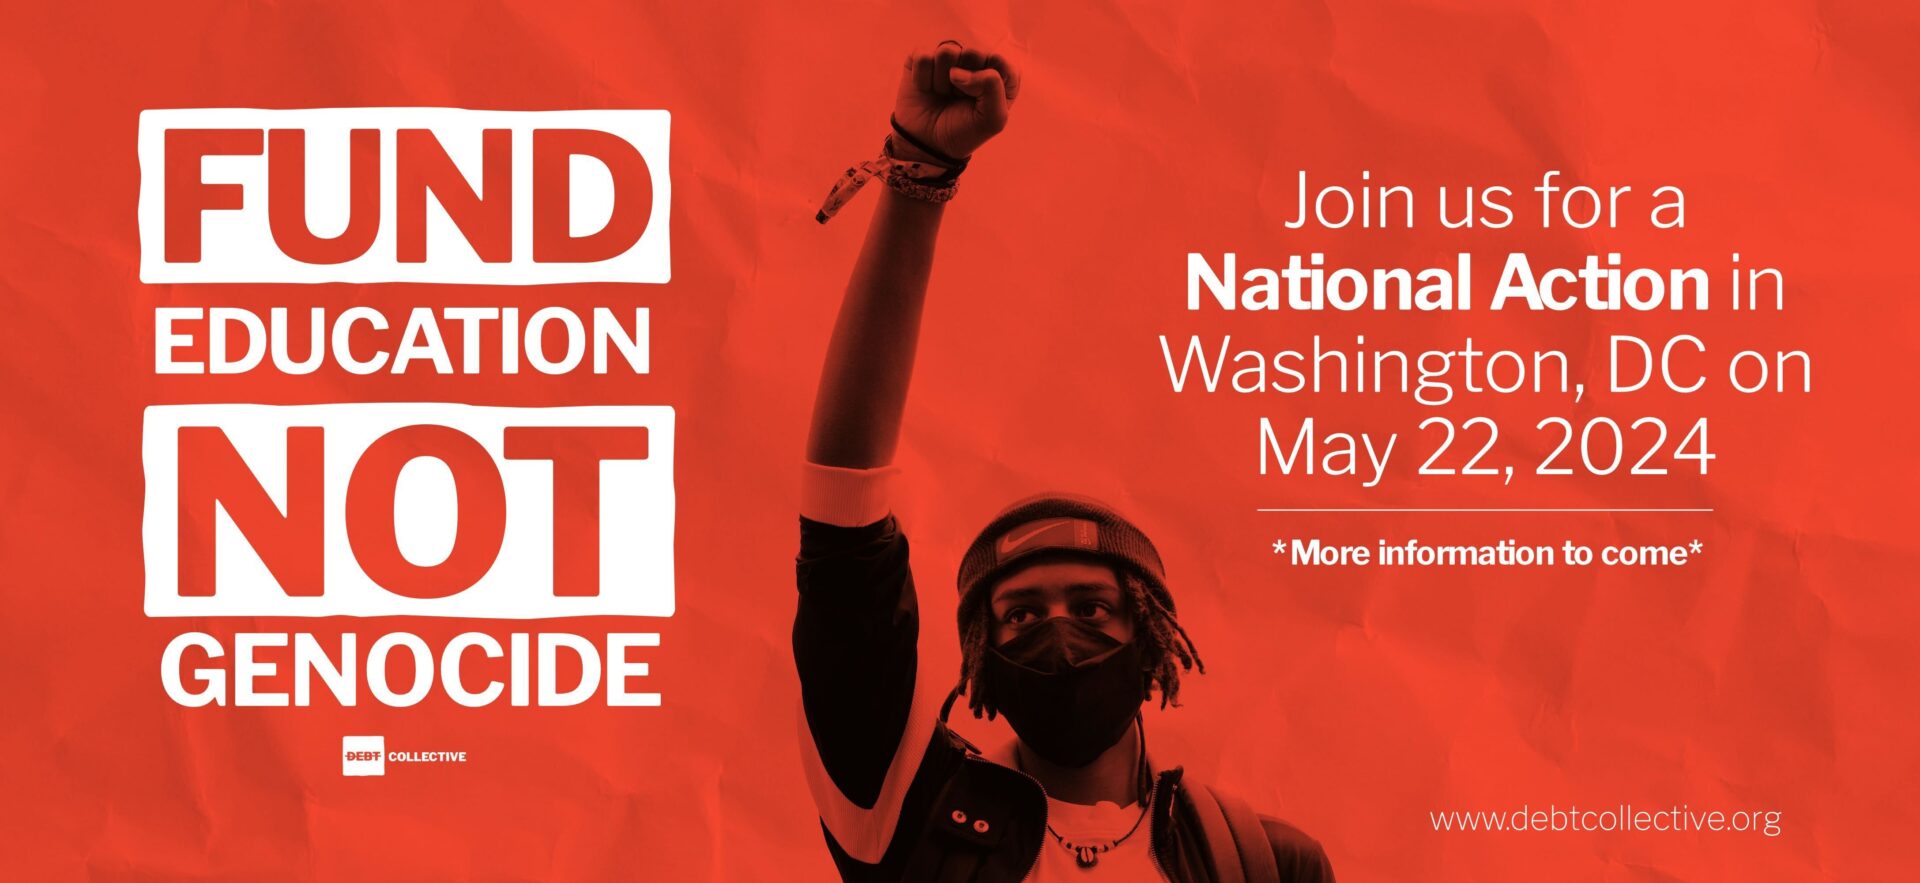 Fund Education Not Genocide: Join us for a National Action in Washington DC on May 22, 2024